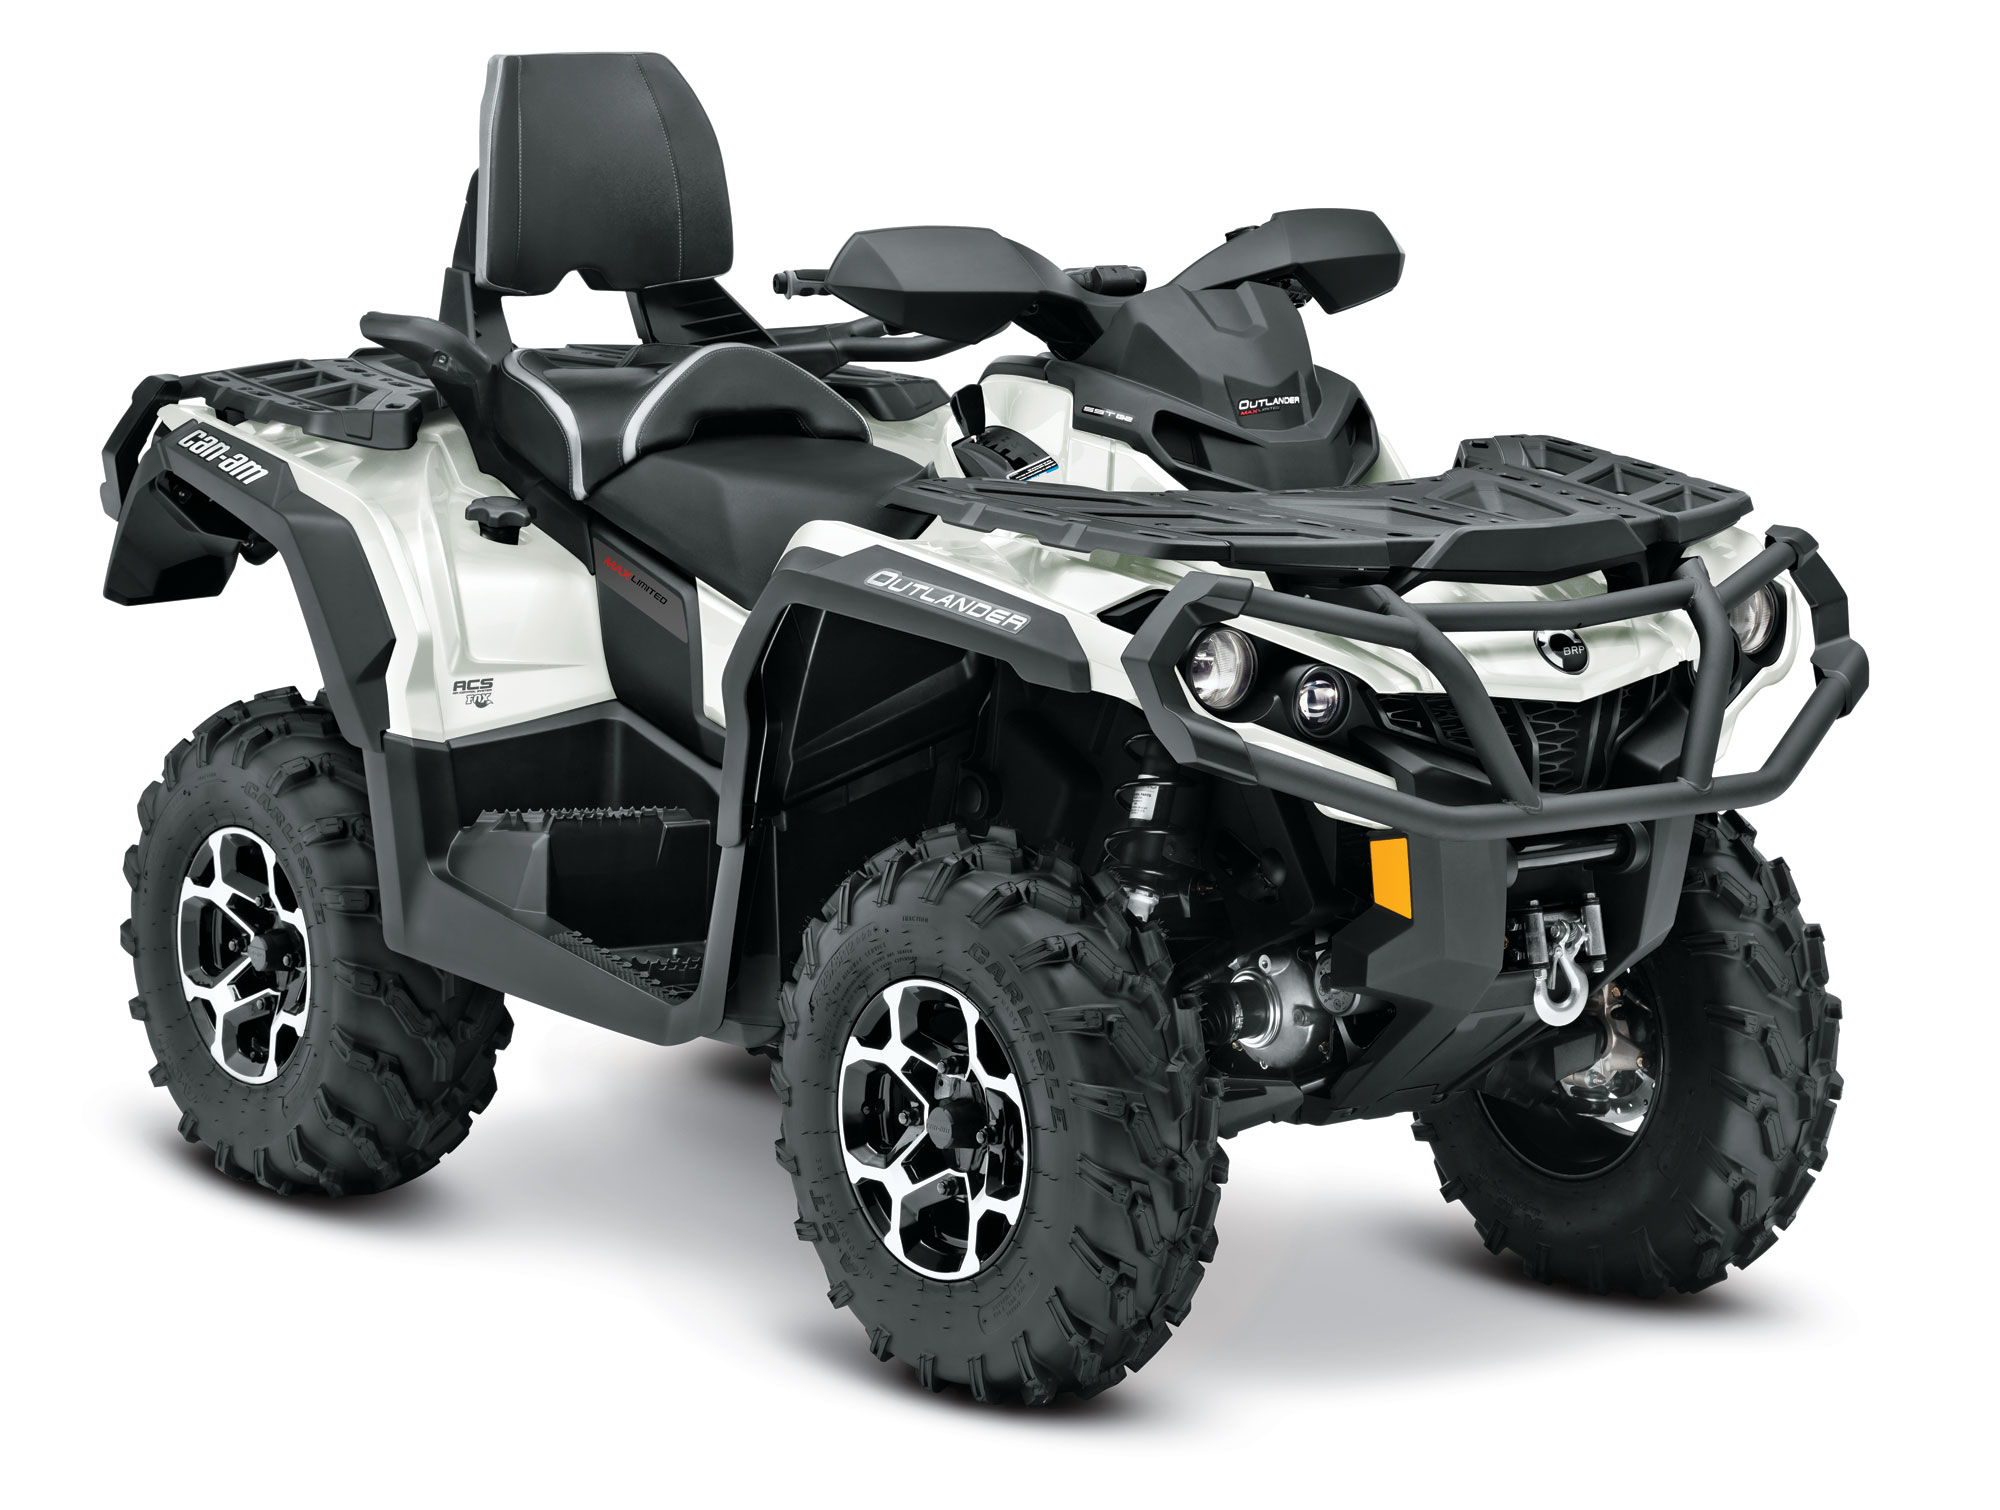 2013, Can am, Outlander, Max, Limited, 1000, Atv, Quad, Offroad